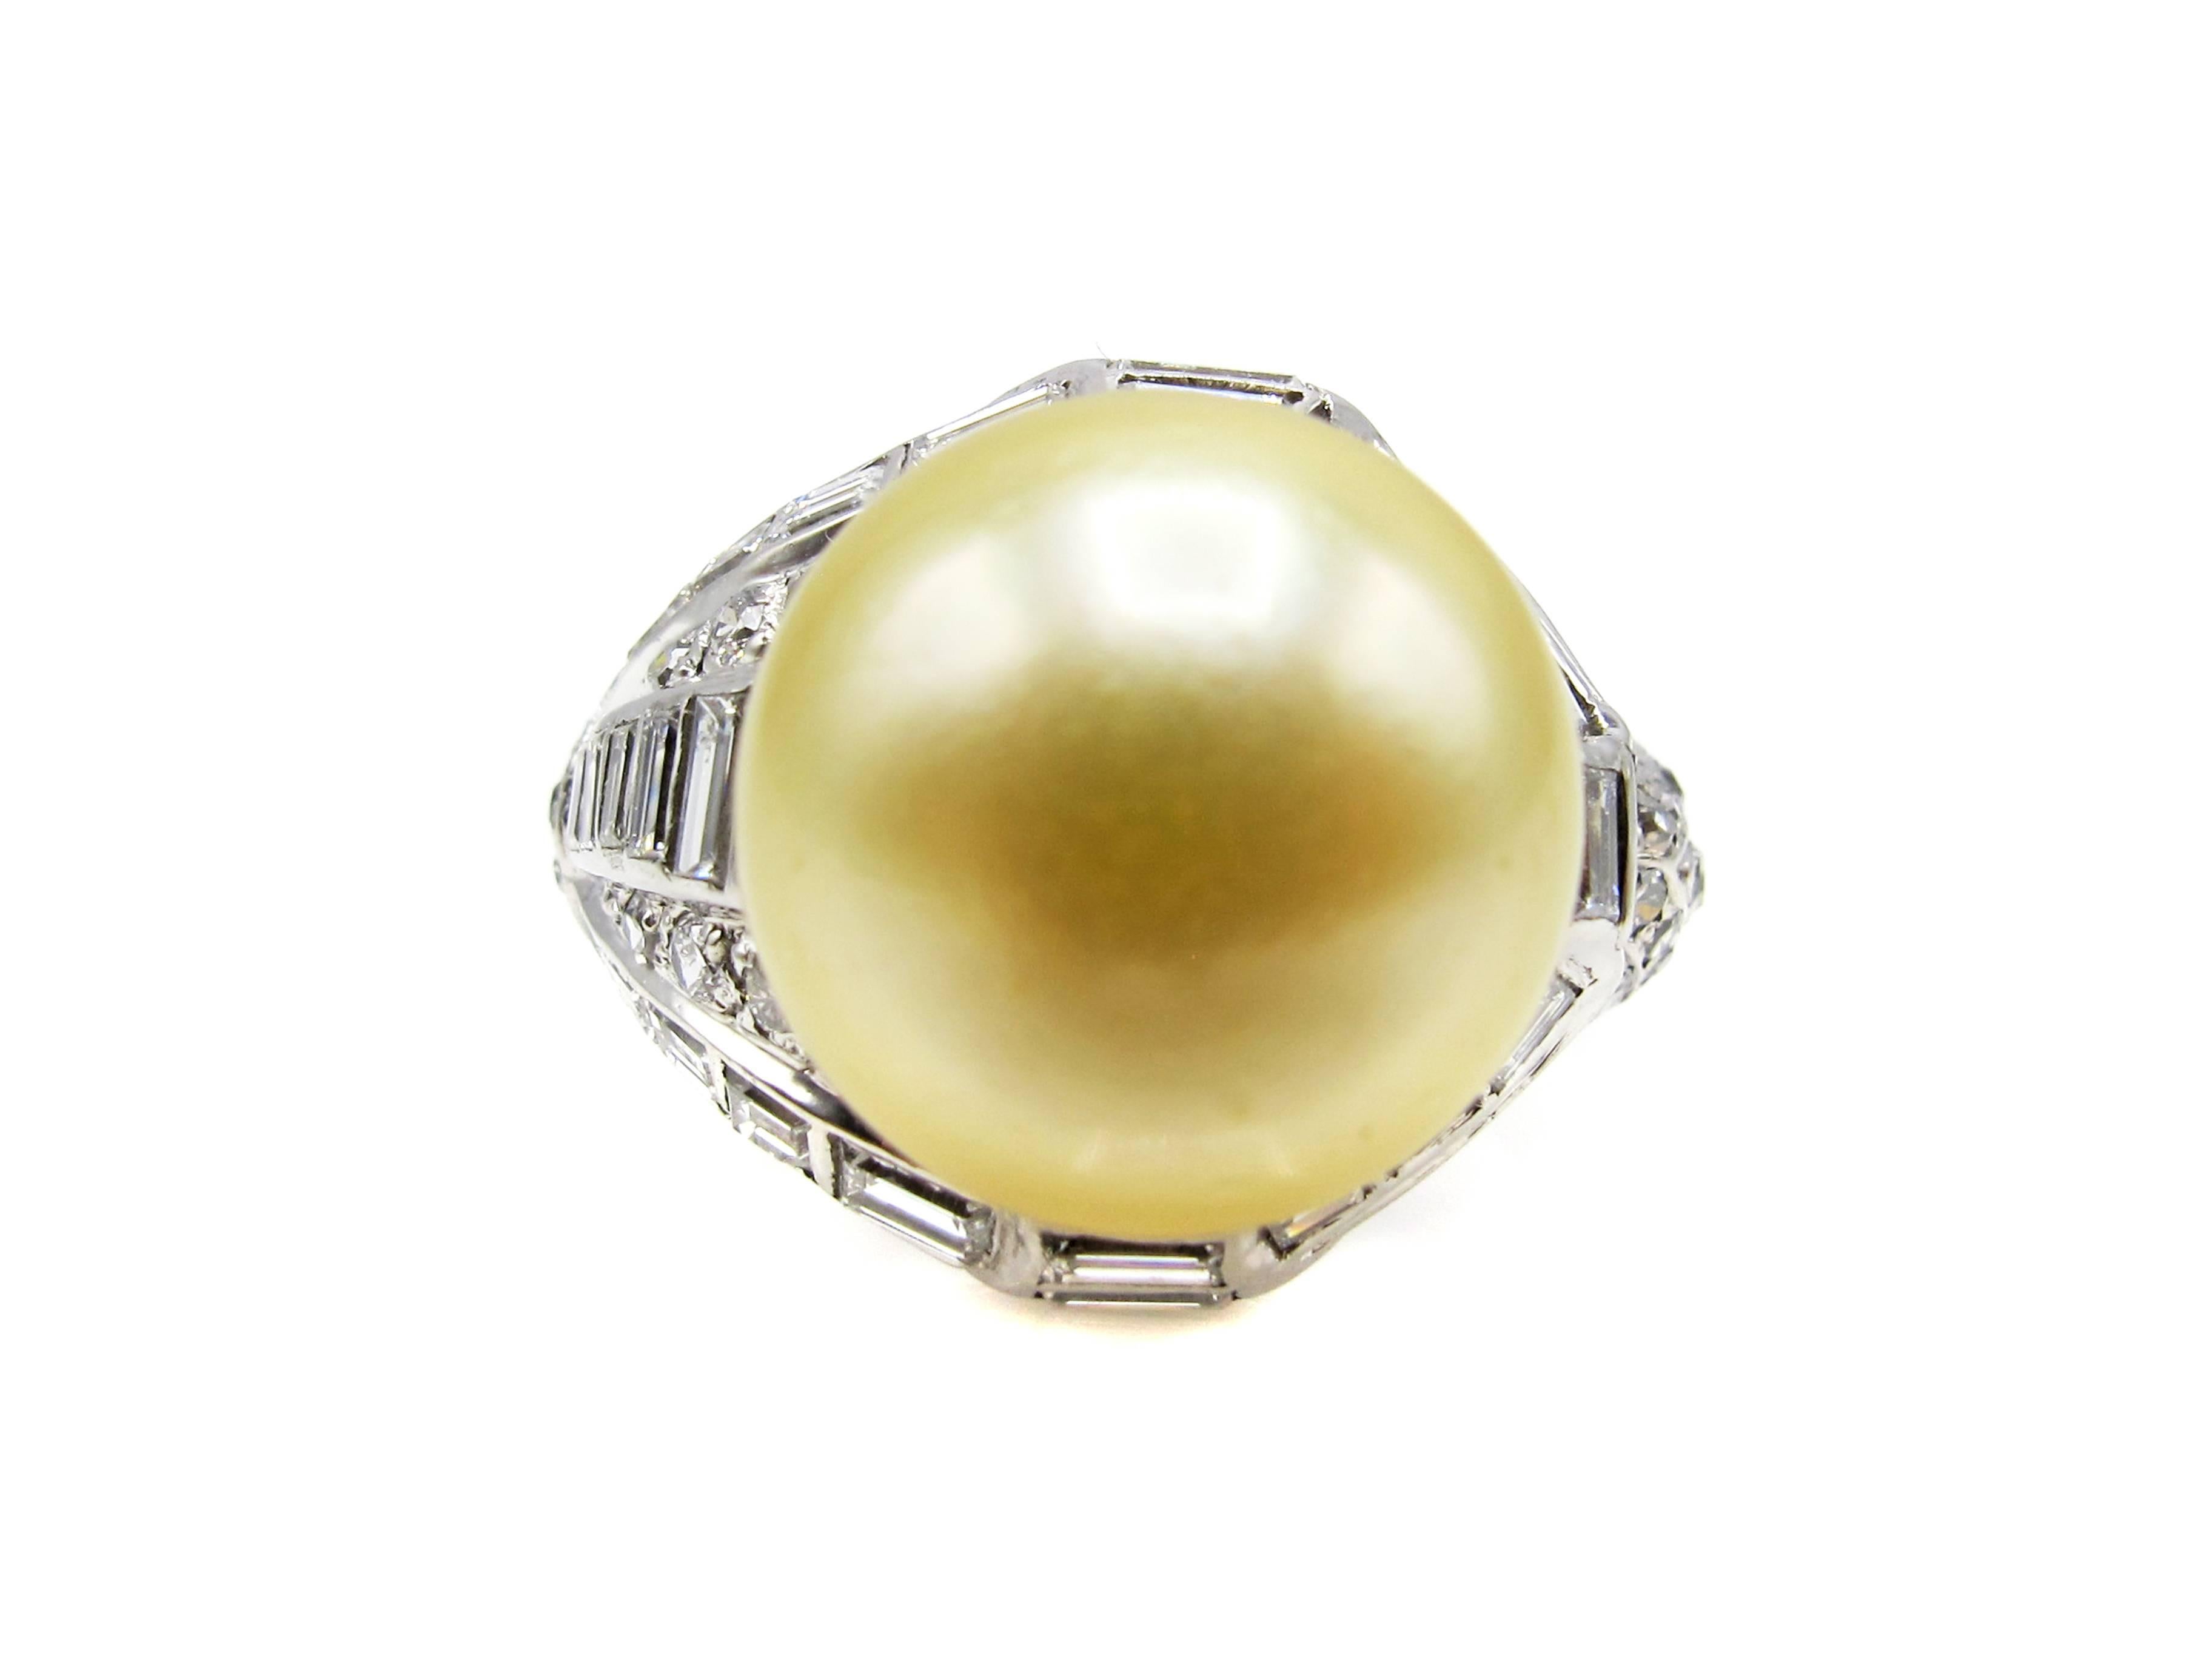 Unusual 1960s asymmetrical South Sea Pearl and diamond ring hand crafted out of 18 karat white gold. This gorgeous perfect slightly golden colored South Sea pearl measures approximately 13.20mm x 11.00 mm and has practically no blemishes with an